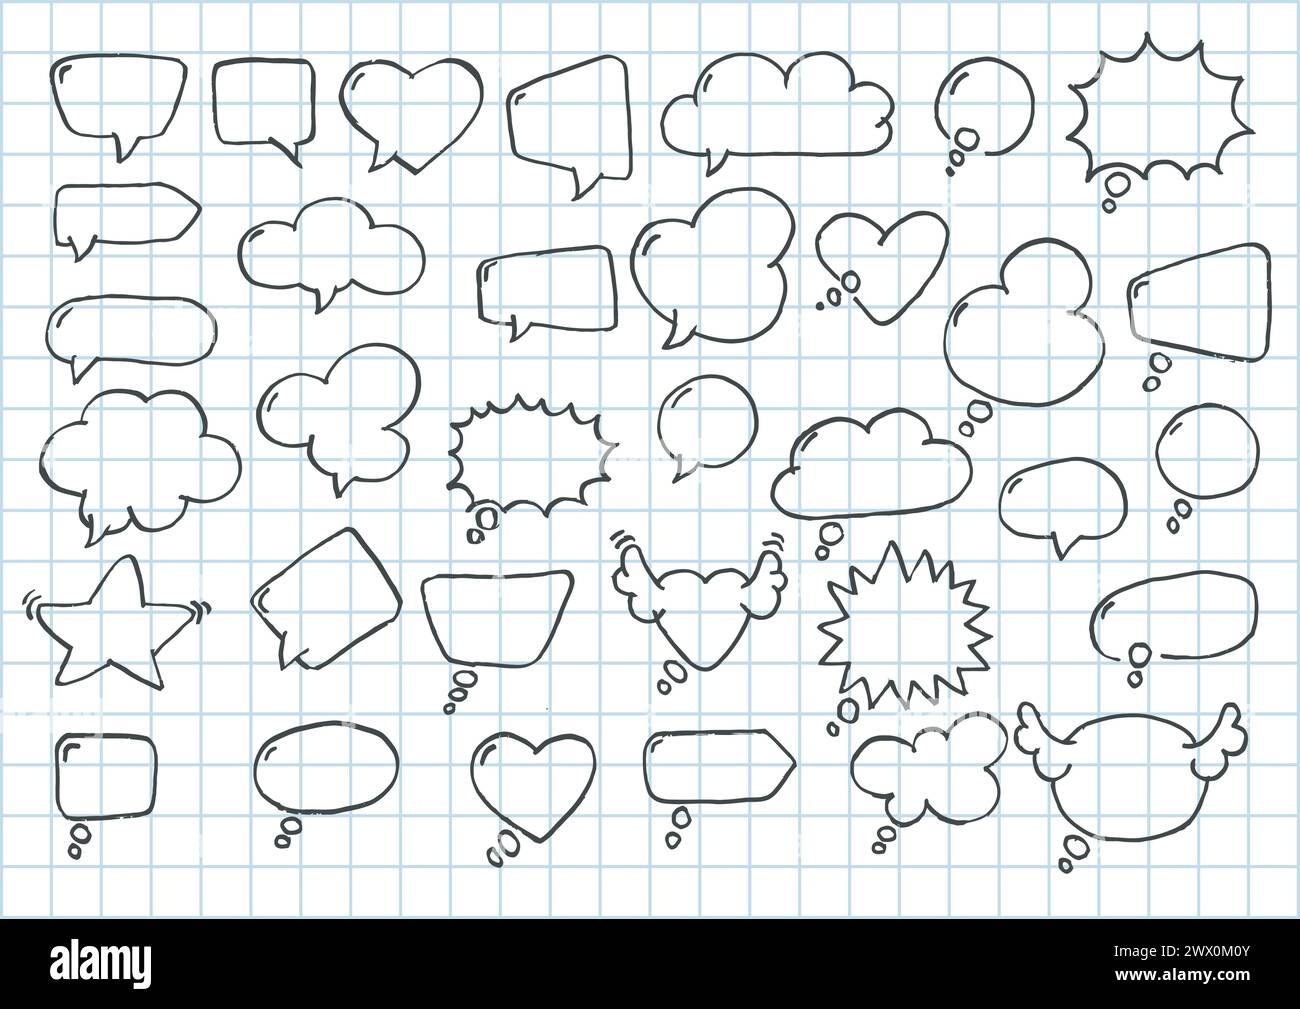 Artistic Collection of Hand Drawn Doodle Style Comic Balloon, Cloud, Heart Shaped Design Elements. Isolated and Real Pen Sketch, Vector Illustration Stock Vector